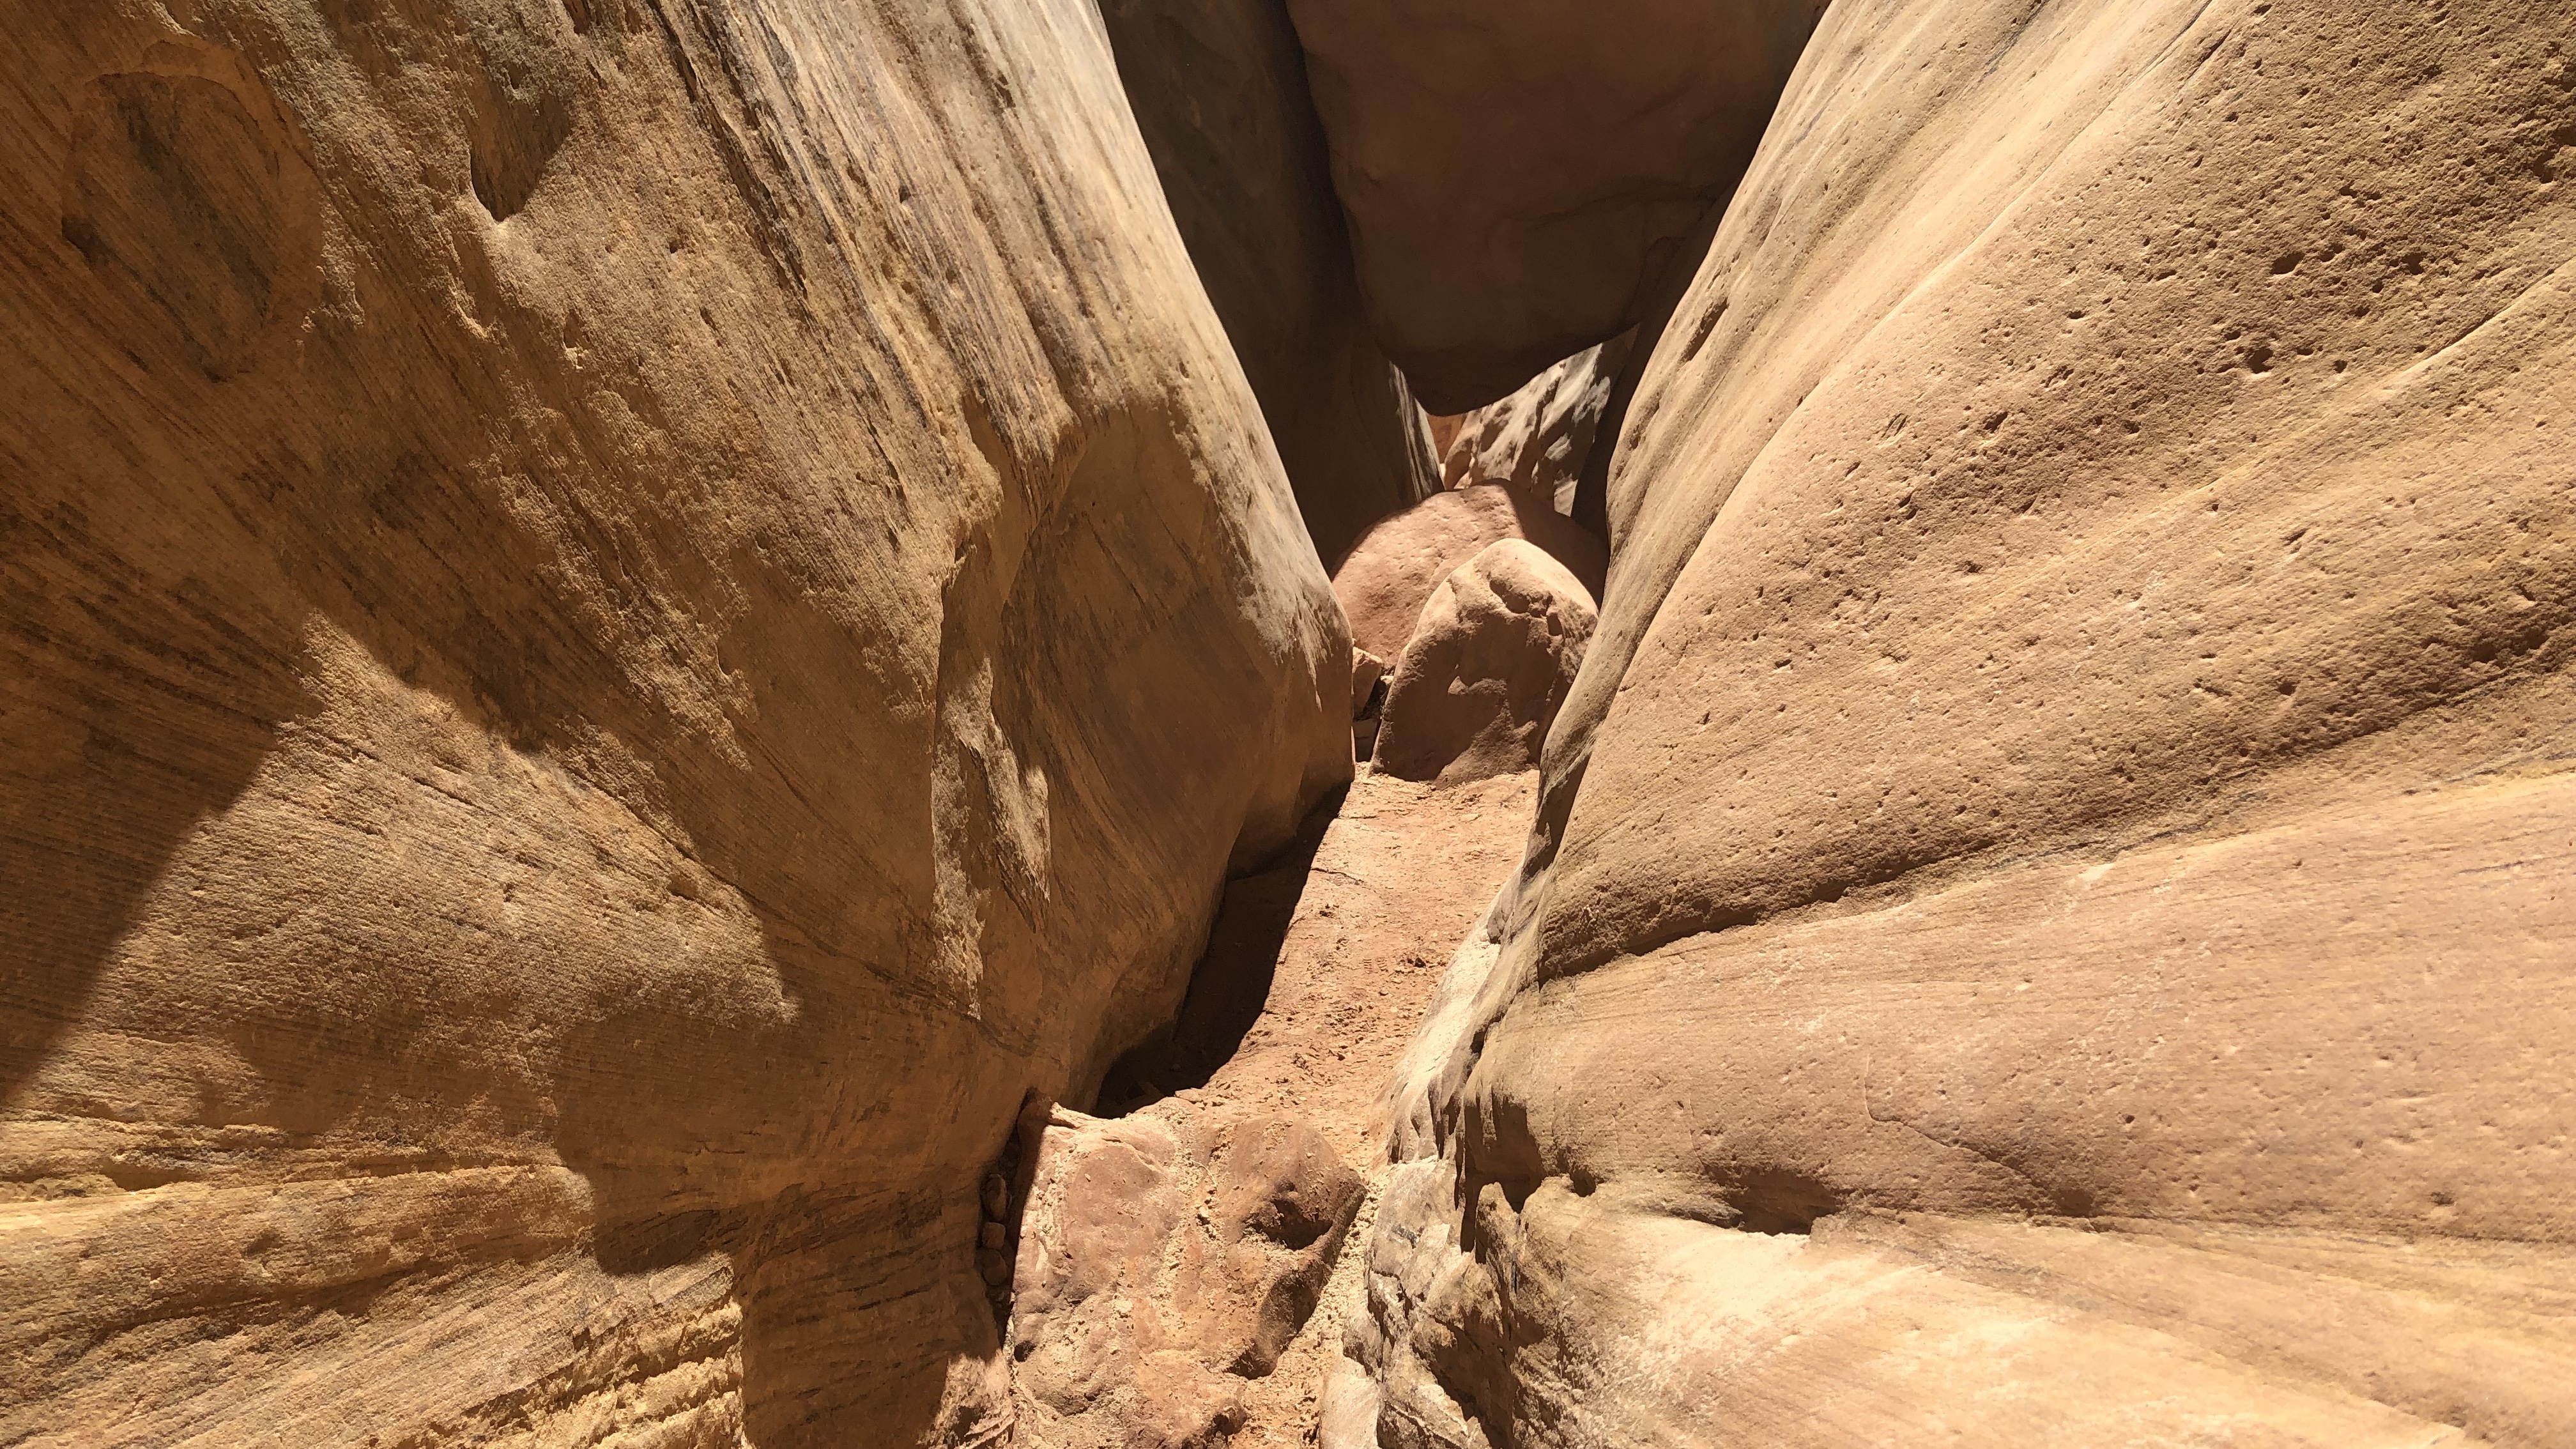 It's all about perspective in a slot canyon  within the San Rafael Swell.